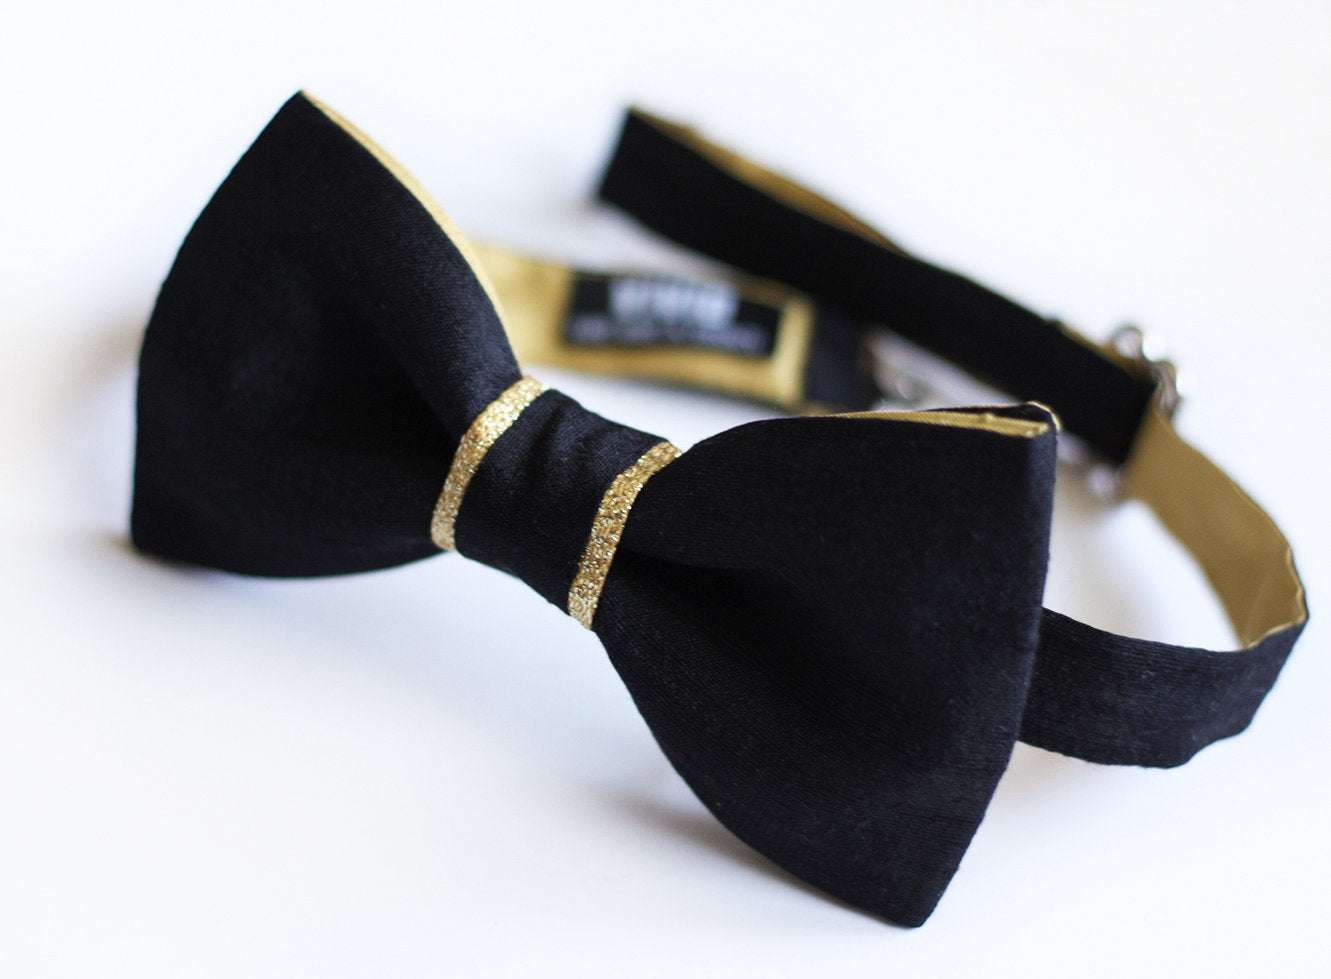 Gold Satin Bow tie, Gold Bow Tie, Gold Christmas Bow tie, Bow ties for Men,  Bow ties for Boys, Gold Bowties, Gold Wedding Bow tie